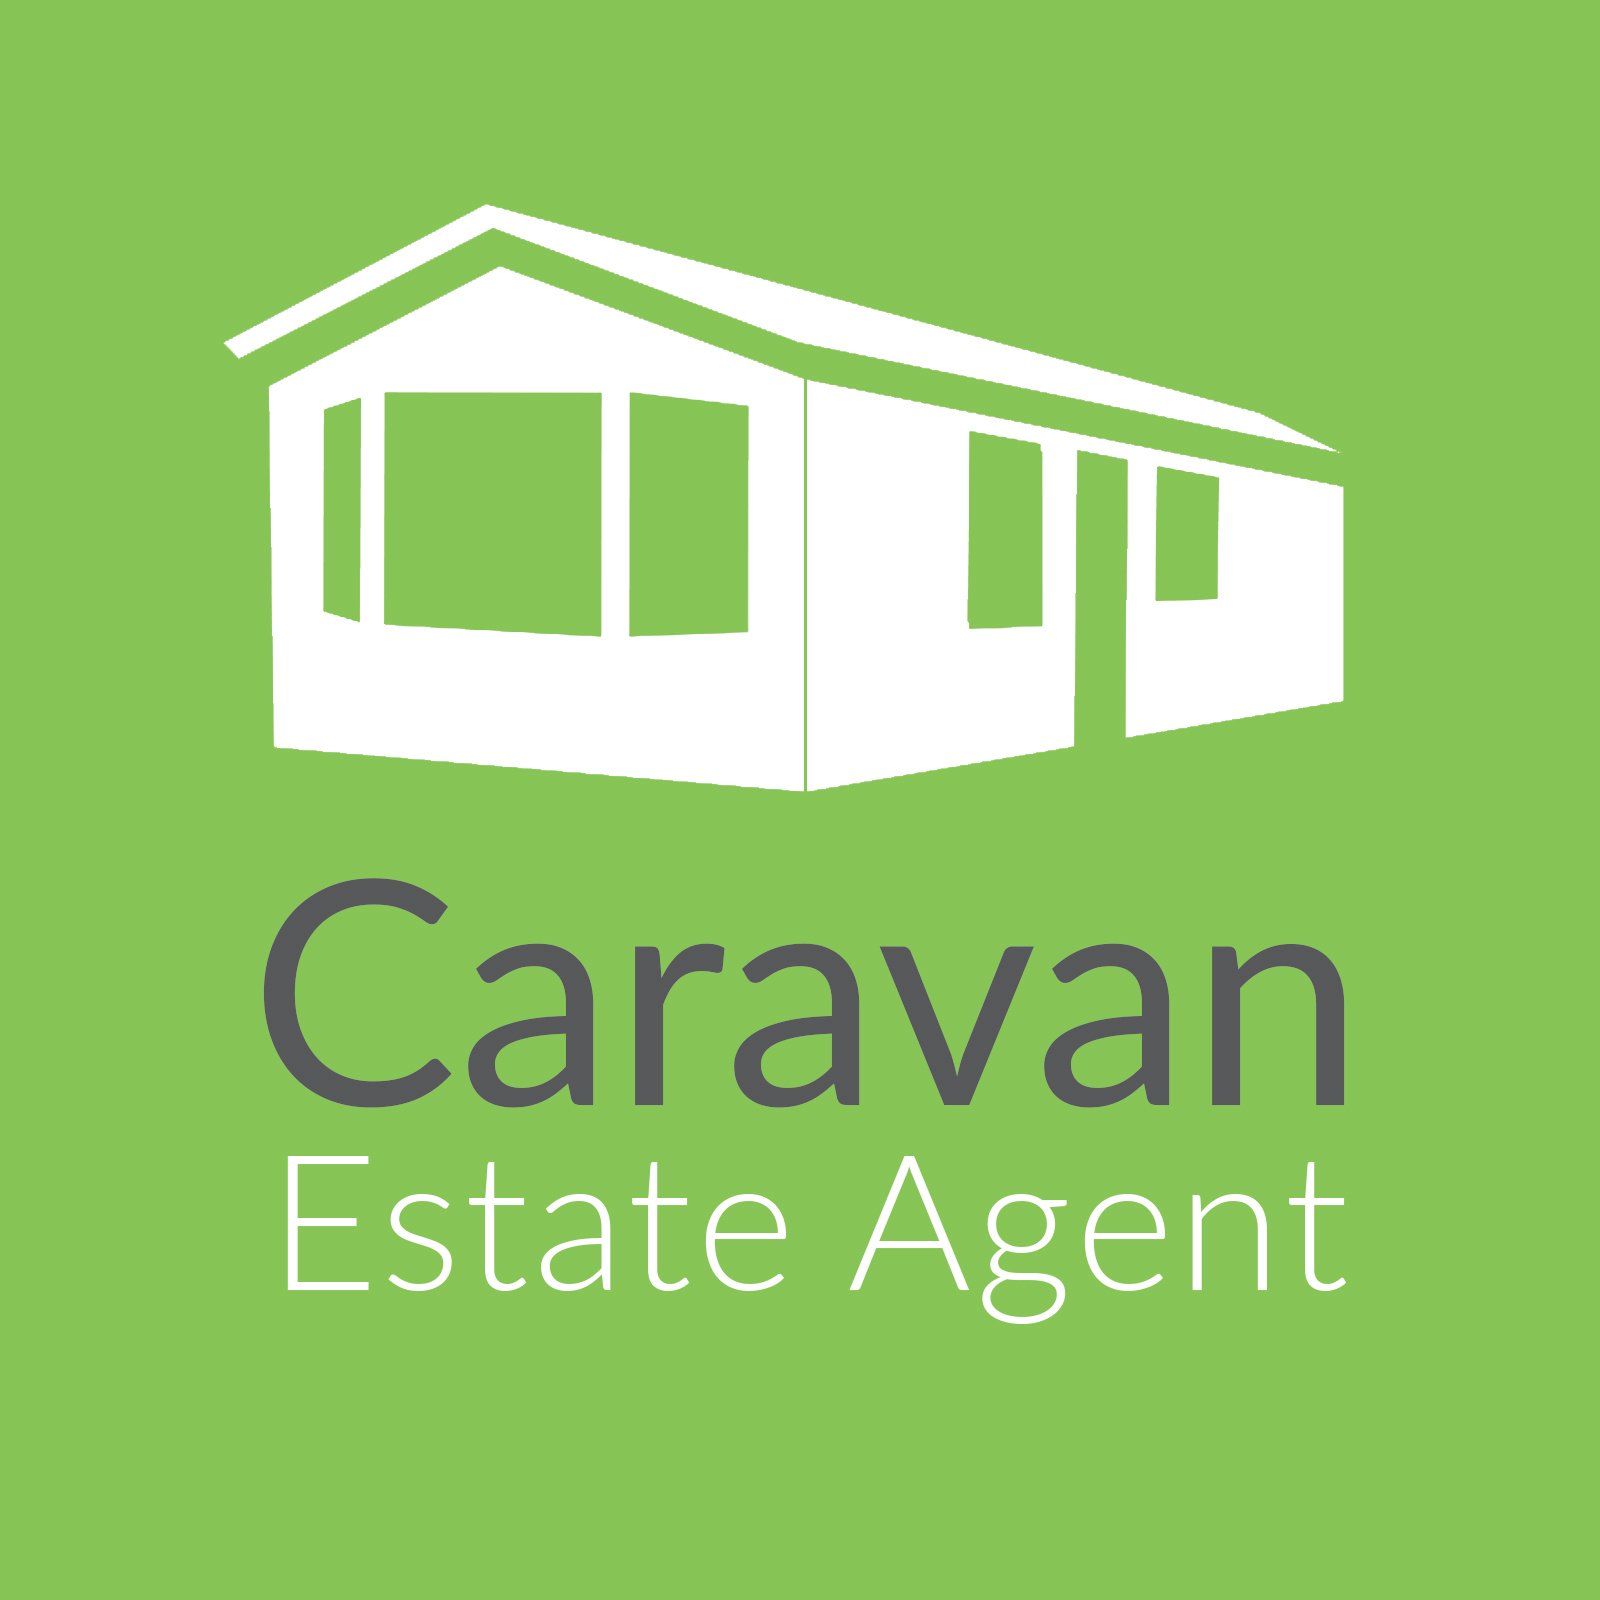 We are an online estate agency specialising in selling & buying holiday homes.
https://t.co/CK3f0c60m6